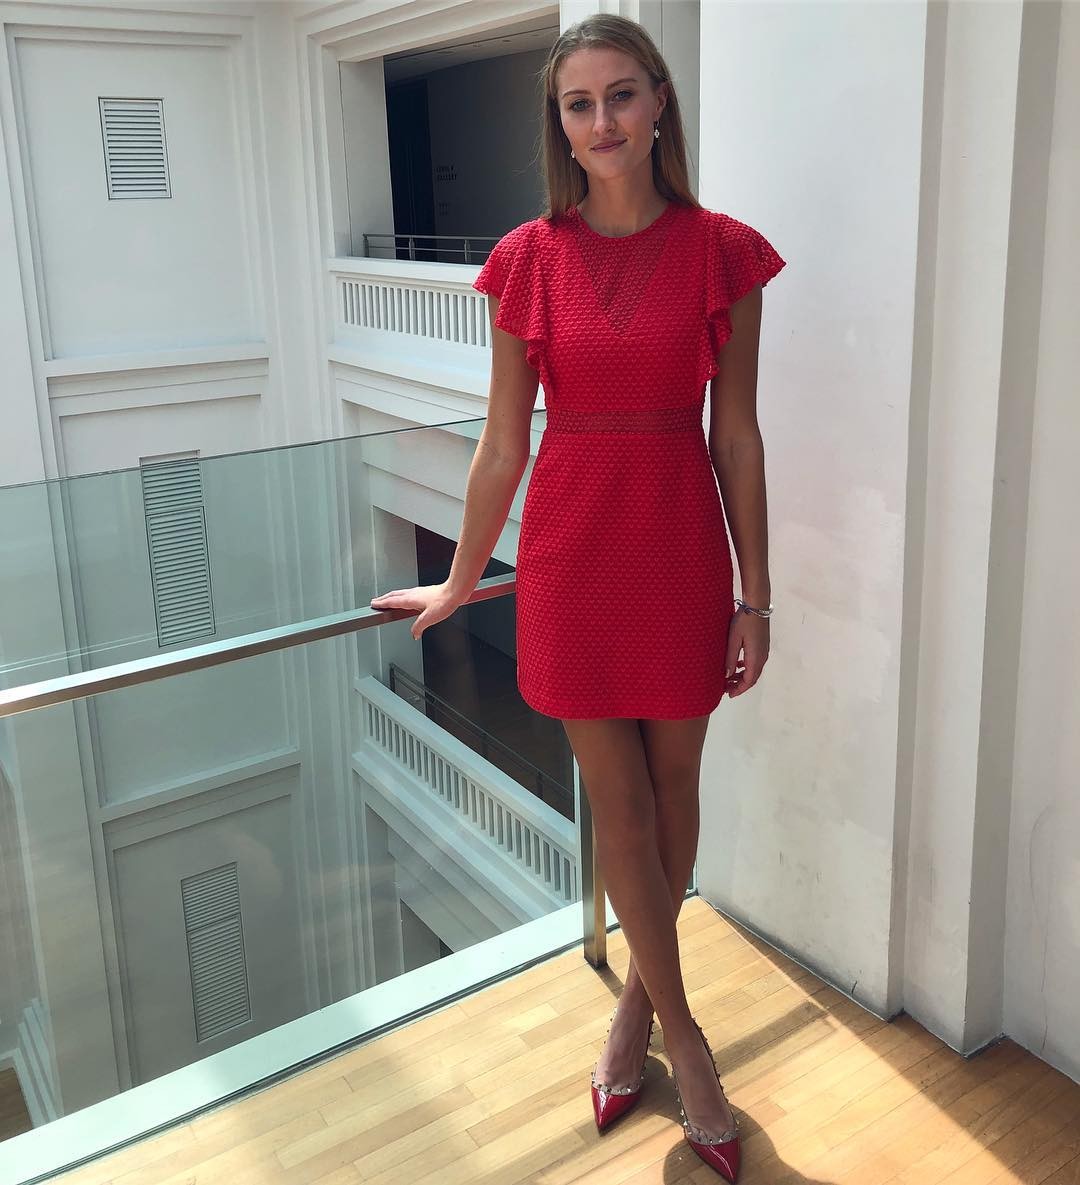 Kristina Mladenovic Sexy 10 - Kristina Mladenovic Sexy Private Photos And Videos 2019